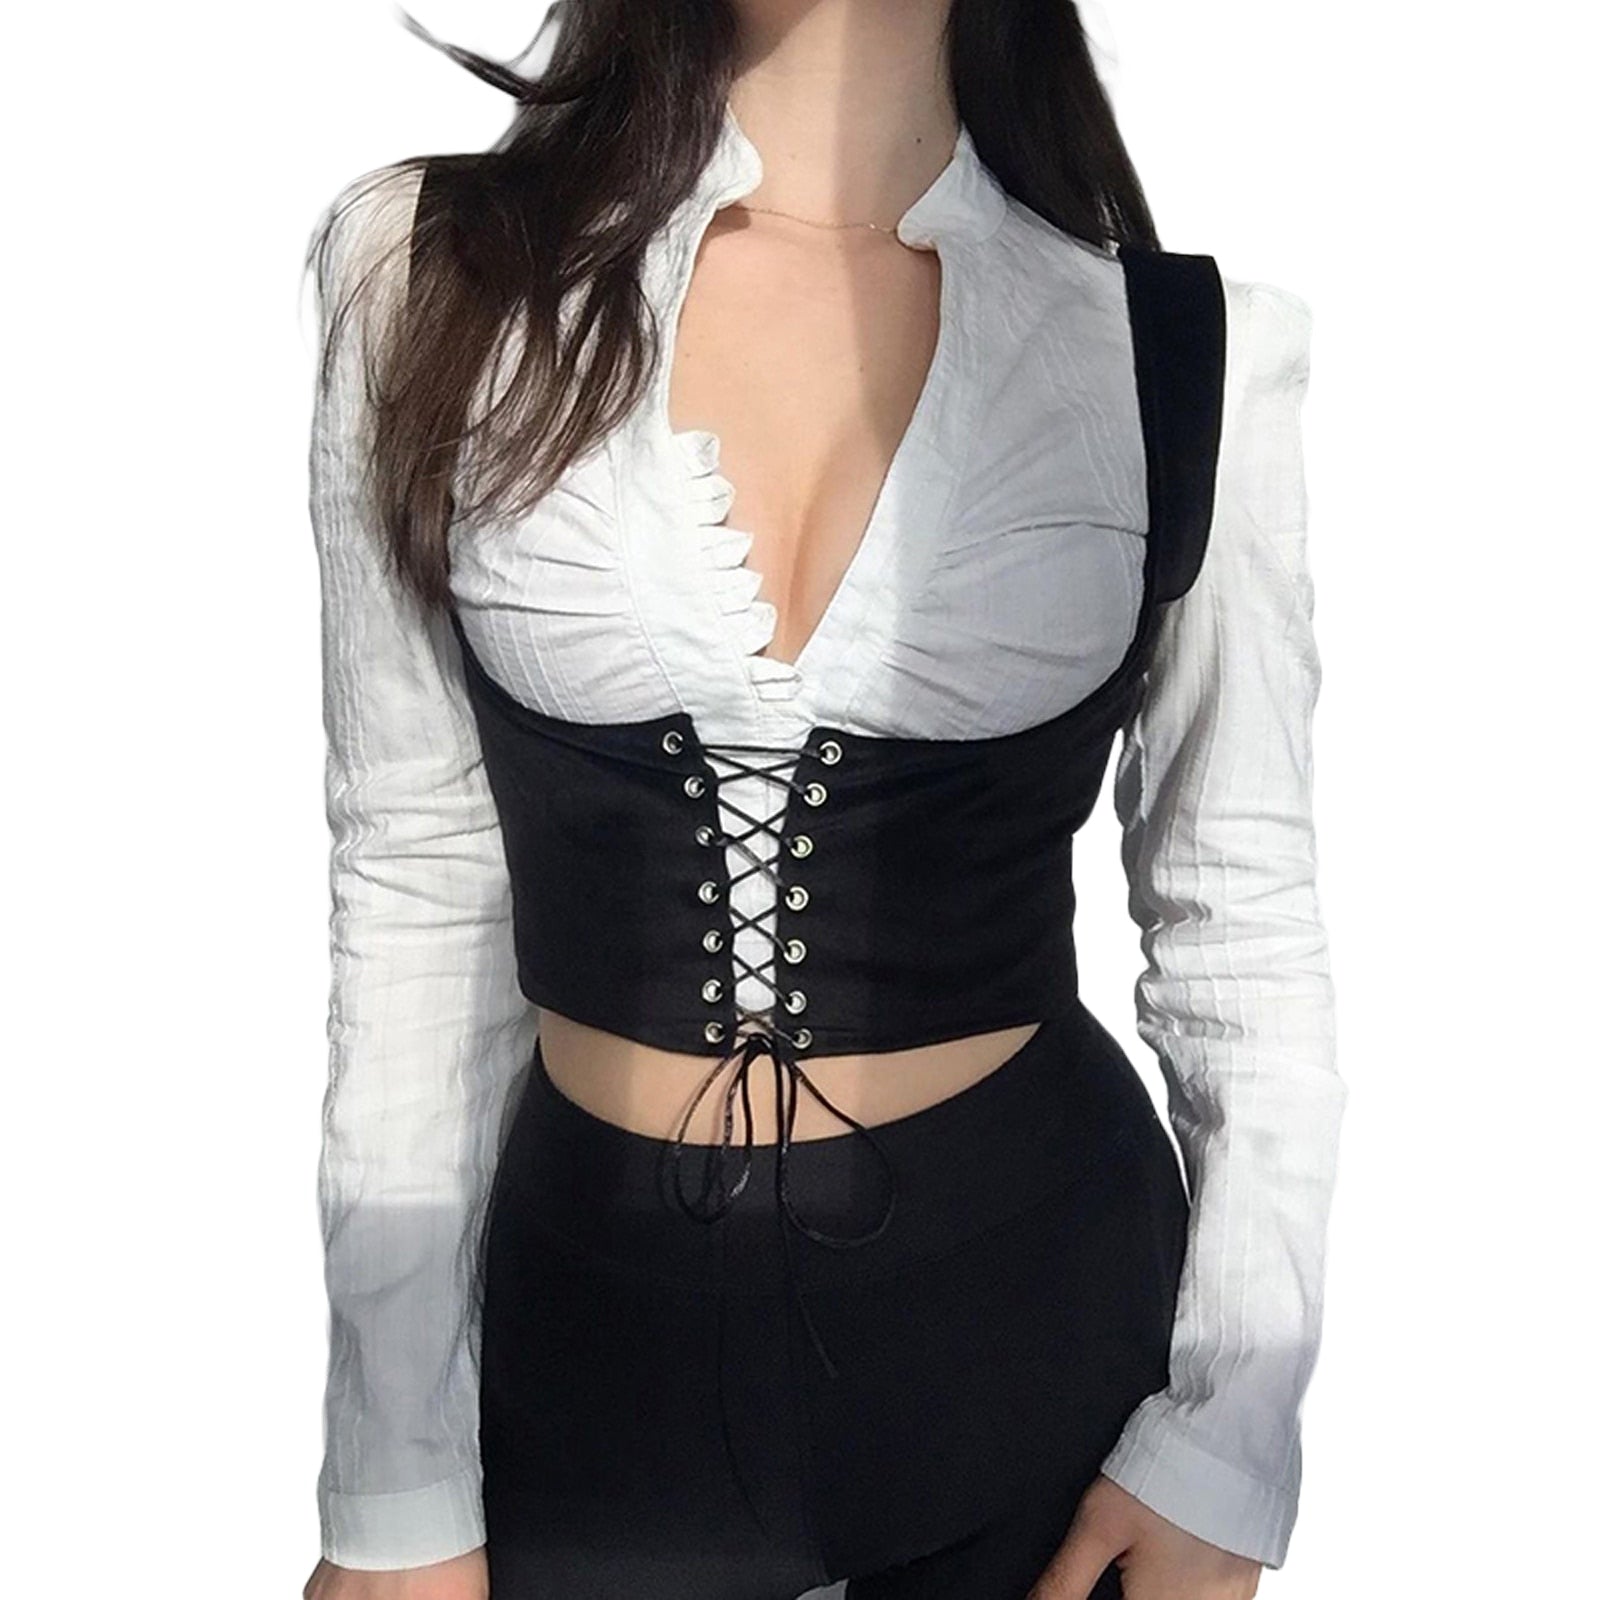 Prettyswomen Gothic Punk Sexy Vintage Bandage Corset Vintage Aesthetic Eyelet Lace Up Skinny Corsets Grunge Goth Accessories Dress Underbust